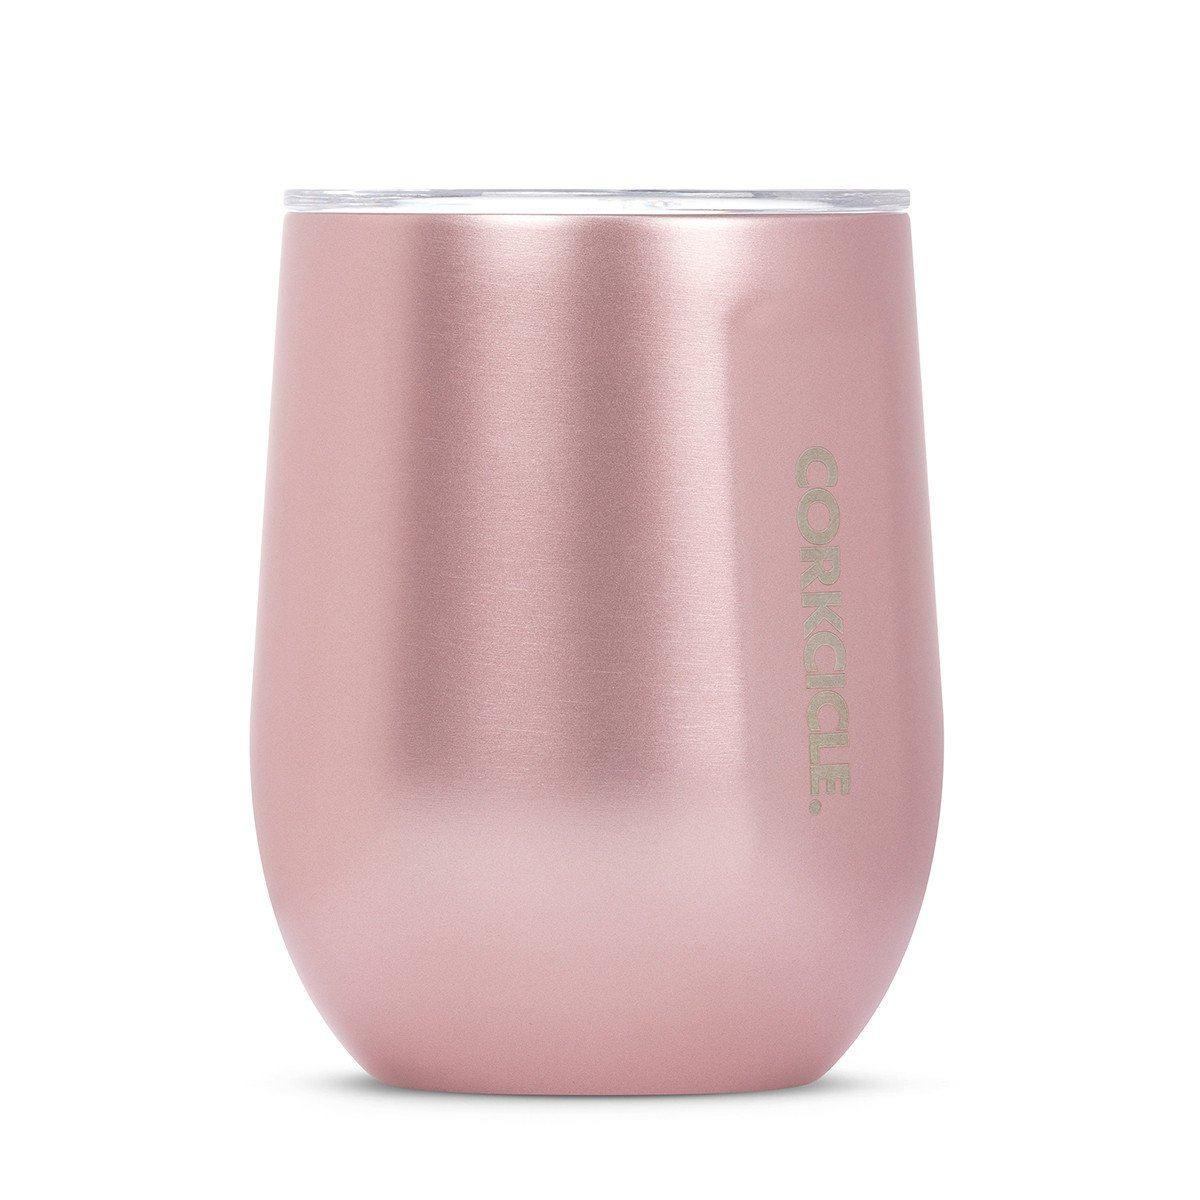 Corkcicle Stemless Reusable Cup Rose Metallic 12oz (355ml) | whiskey glass | Re Usable cup | reusable mug | mugs | travel mug | Party cup | Kids Drink cup | Water cup | corkcicle cup | best cup | personalised cup Australia | wine cup Australia | travel cup | camping cup | Cup | Coffee Cup | Upcycle Studio